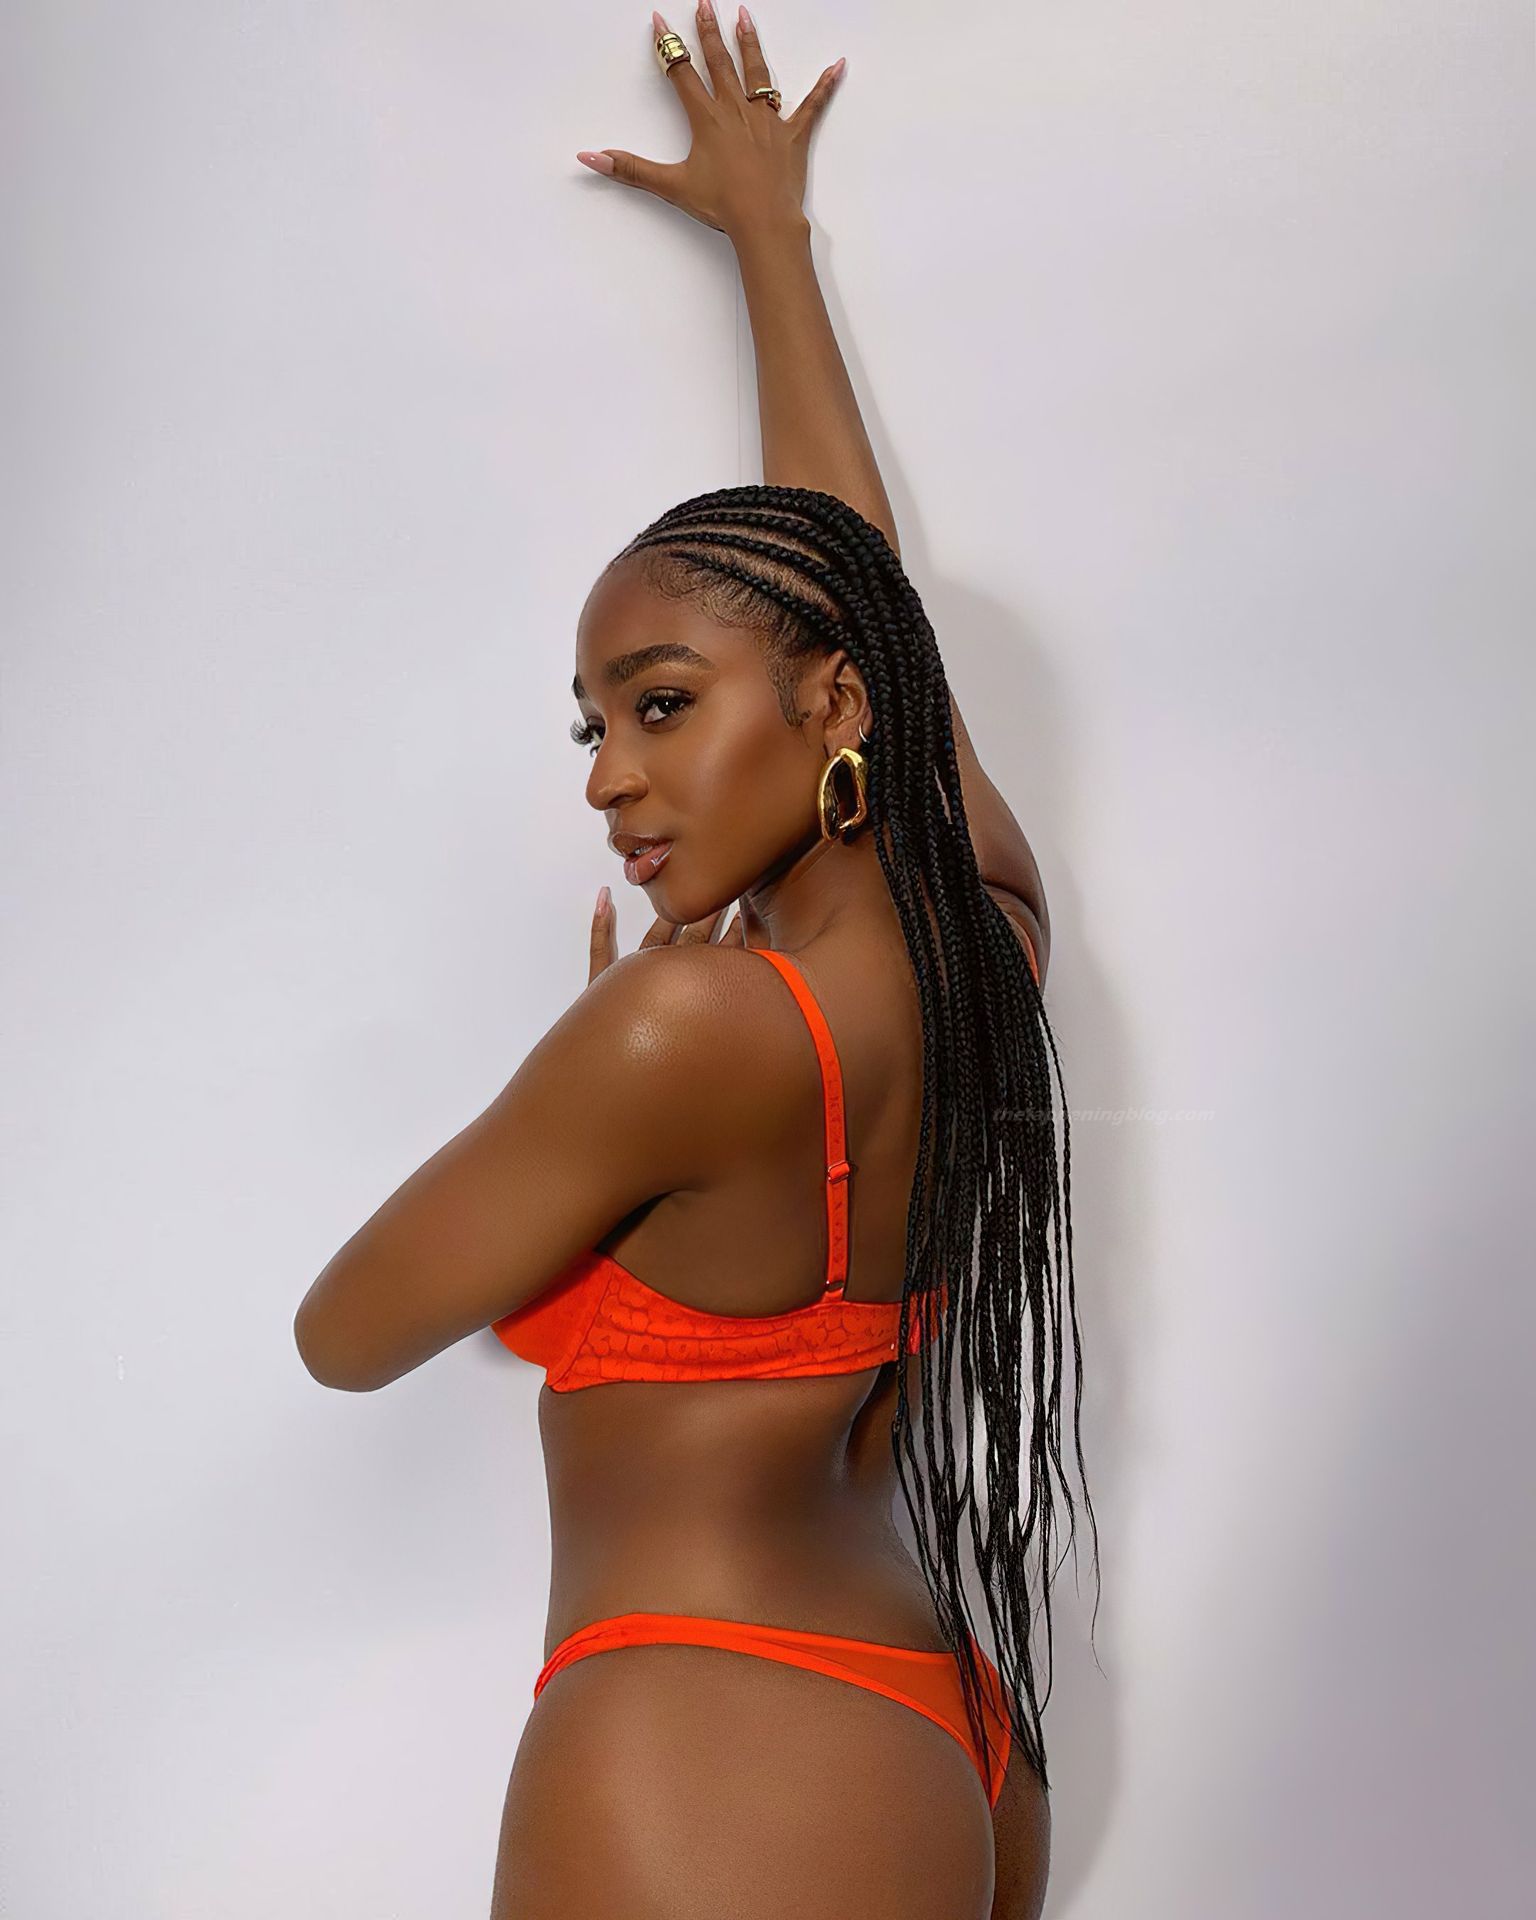 Normani Kordei Poses in Sexy Lingerie (5 Photos)